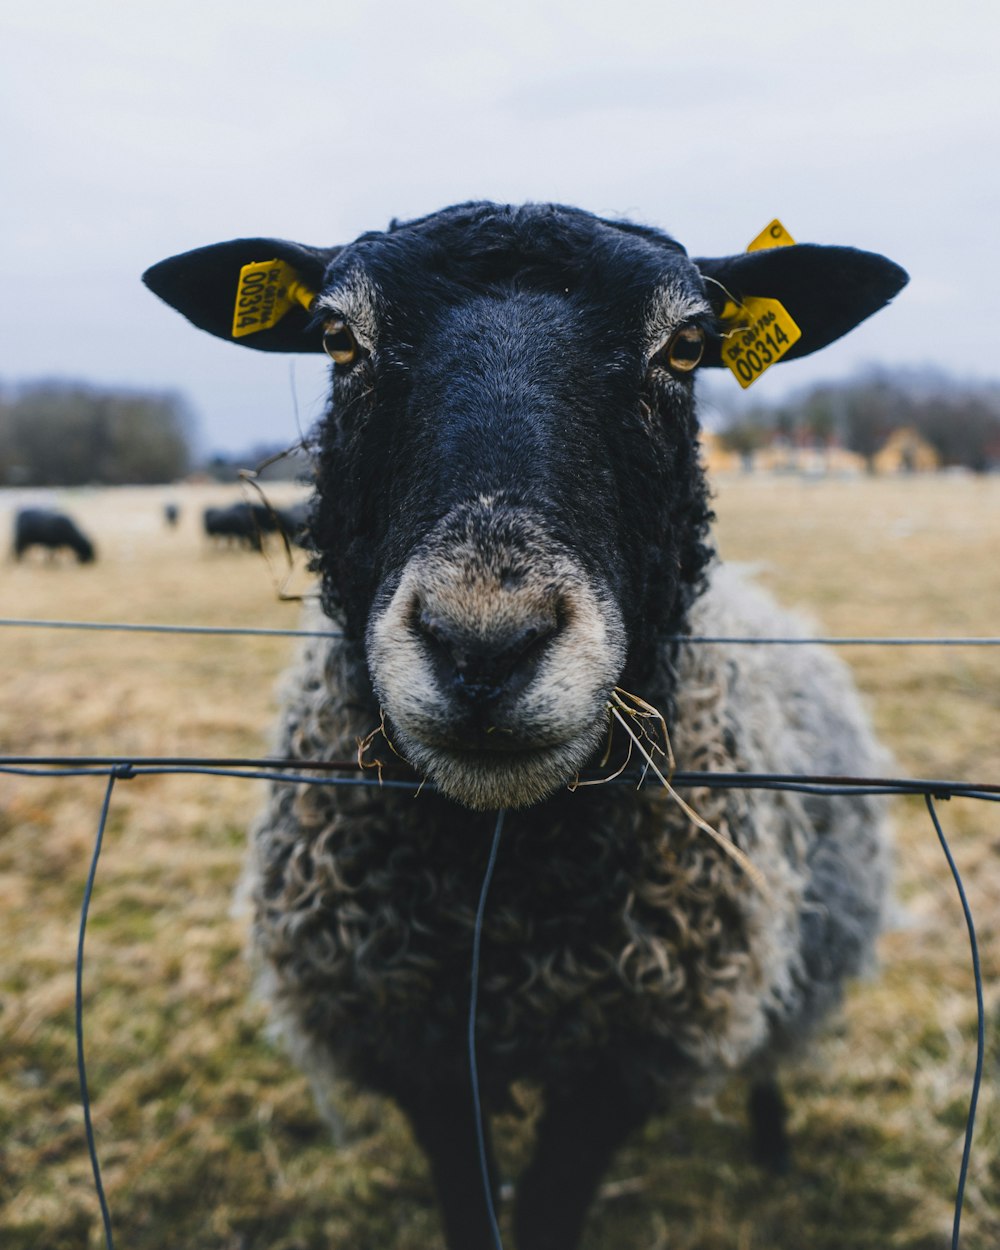 black sheep with yellow tag on ears